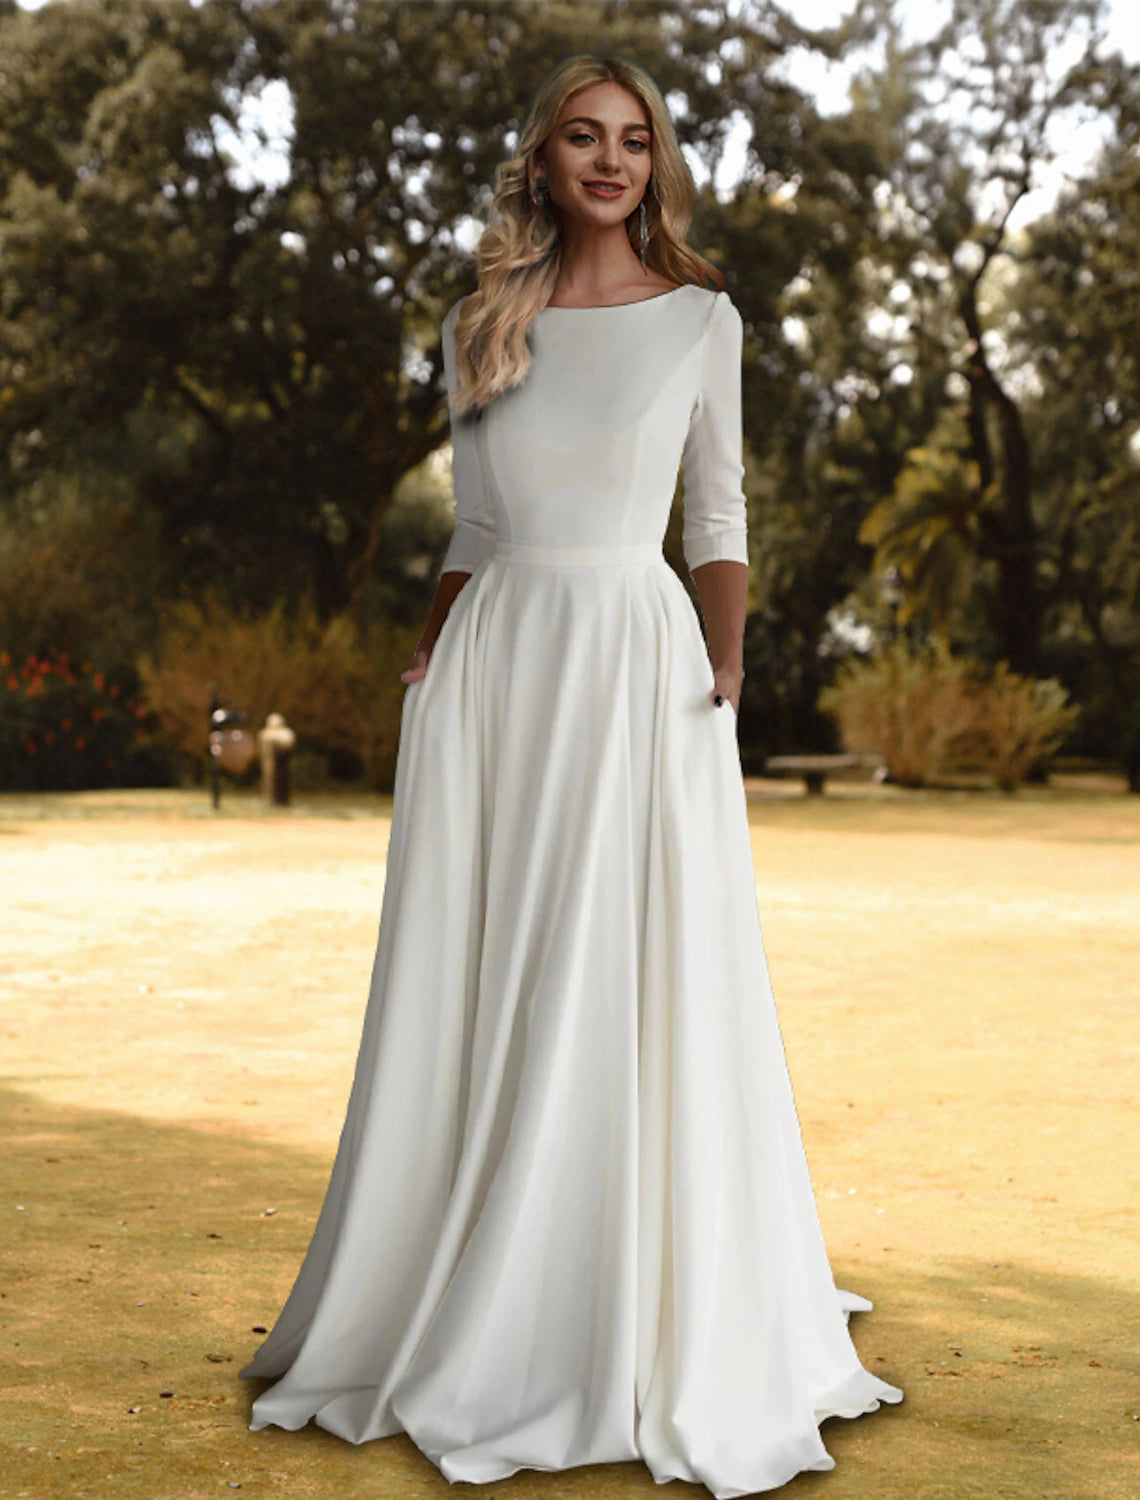 Hall Casual Fall Wedding Dresses A-Line Scoop Neck 3/4 Length Sleeve Sweep / Brush Train Stretch Fabric Bridal Gowns With Pleats Solid Color Summer Wedding Party